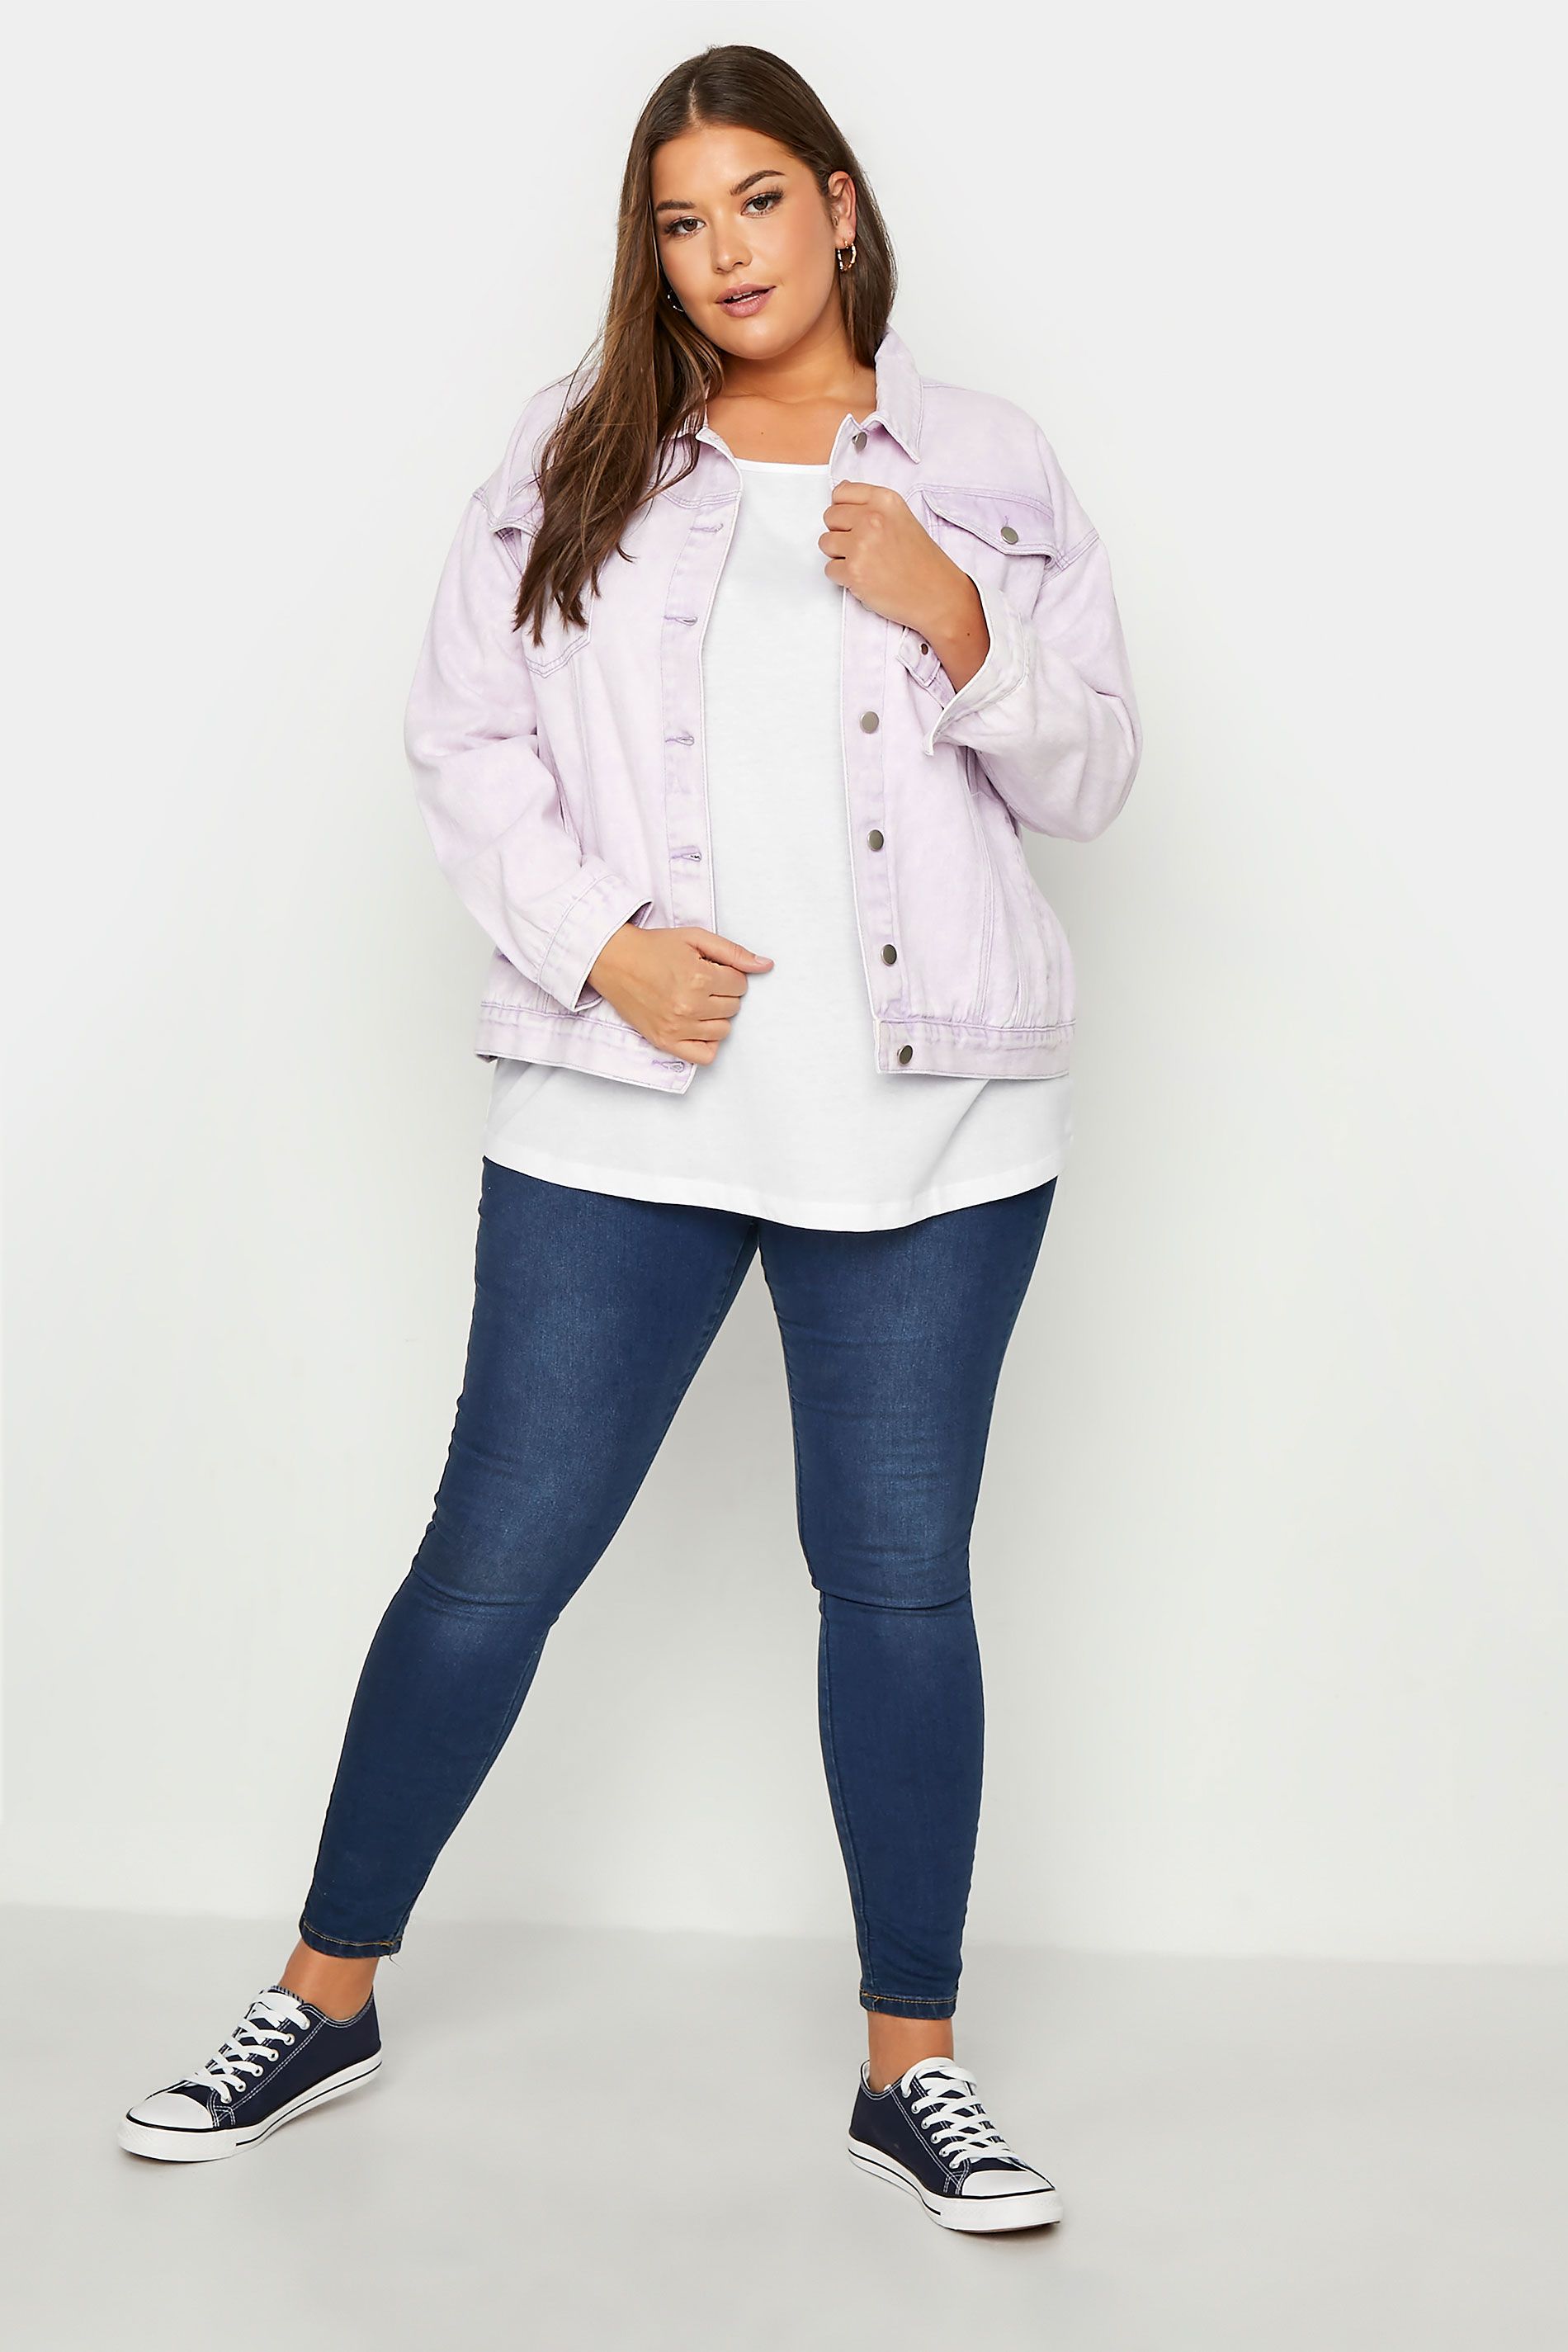 Grande taille  Tops Grande taille  Tops à Manches Longues | T-Shirt Blanc Manches Longues en Jersey - RB63706